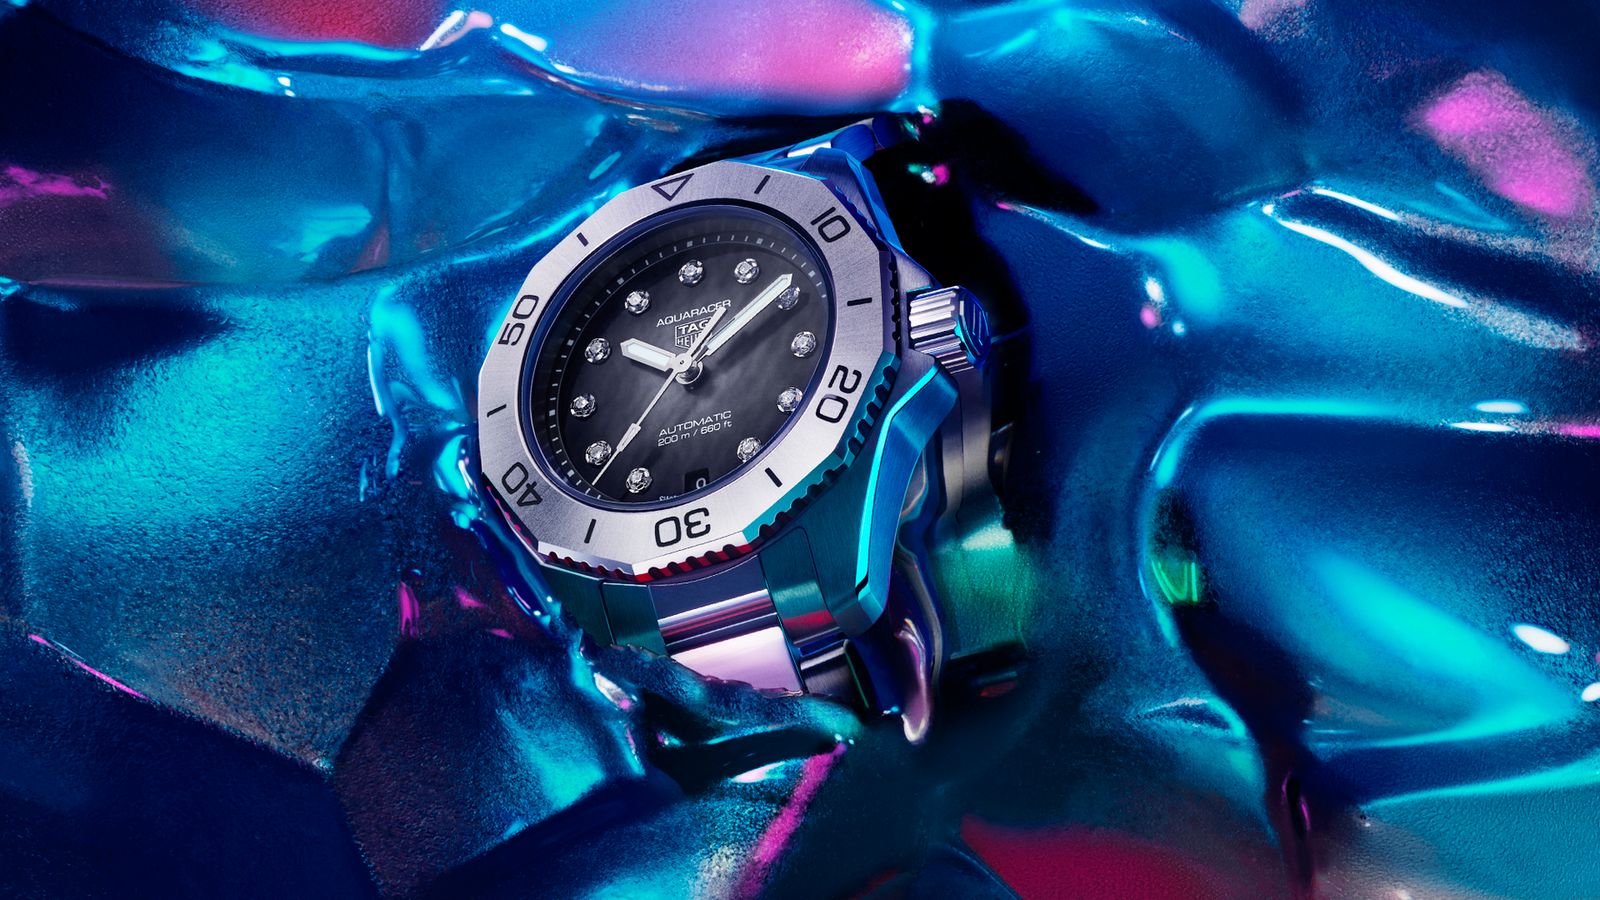 TAG HEUER INTRODUCES THE NEW AQUARACER PROFESSIONAL 200